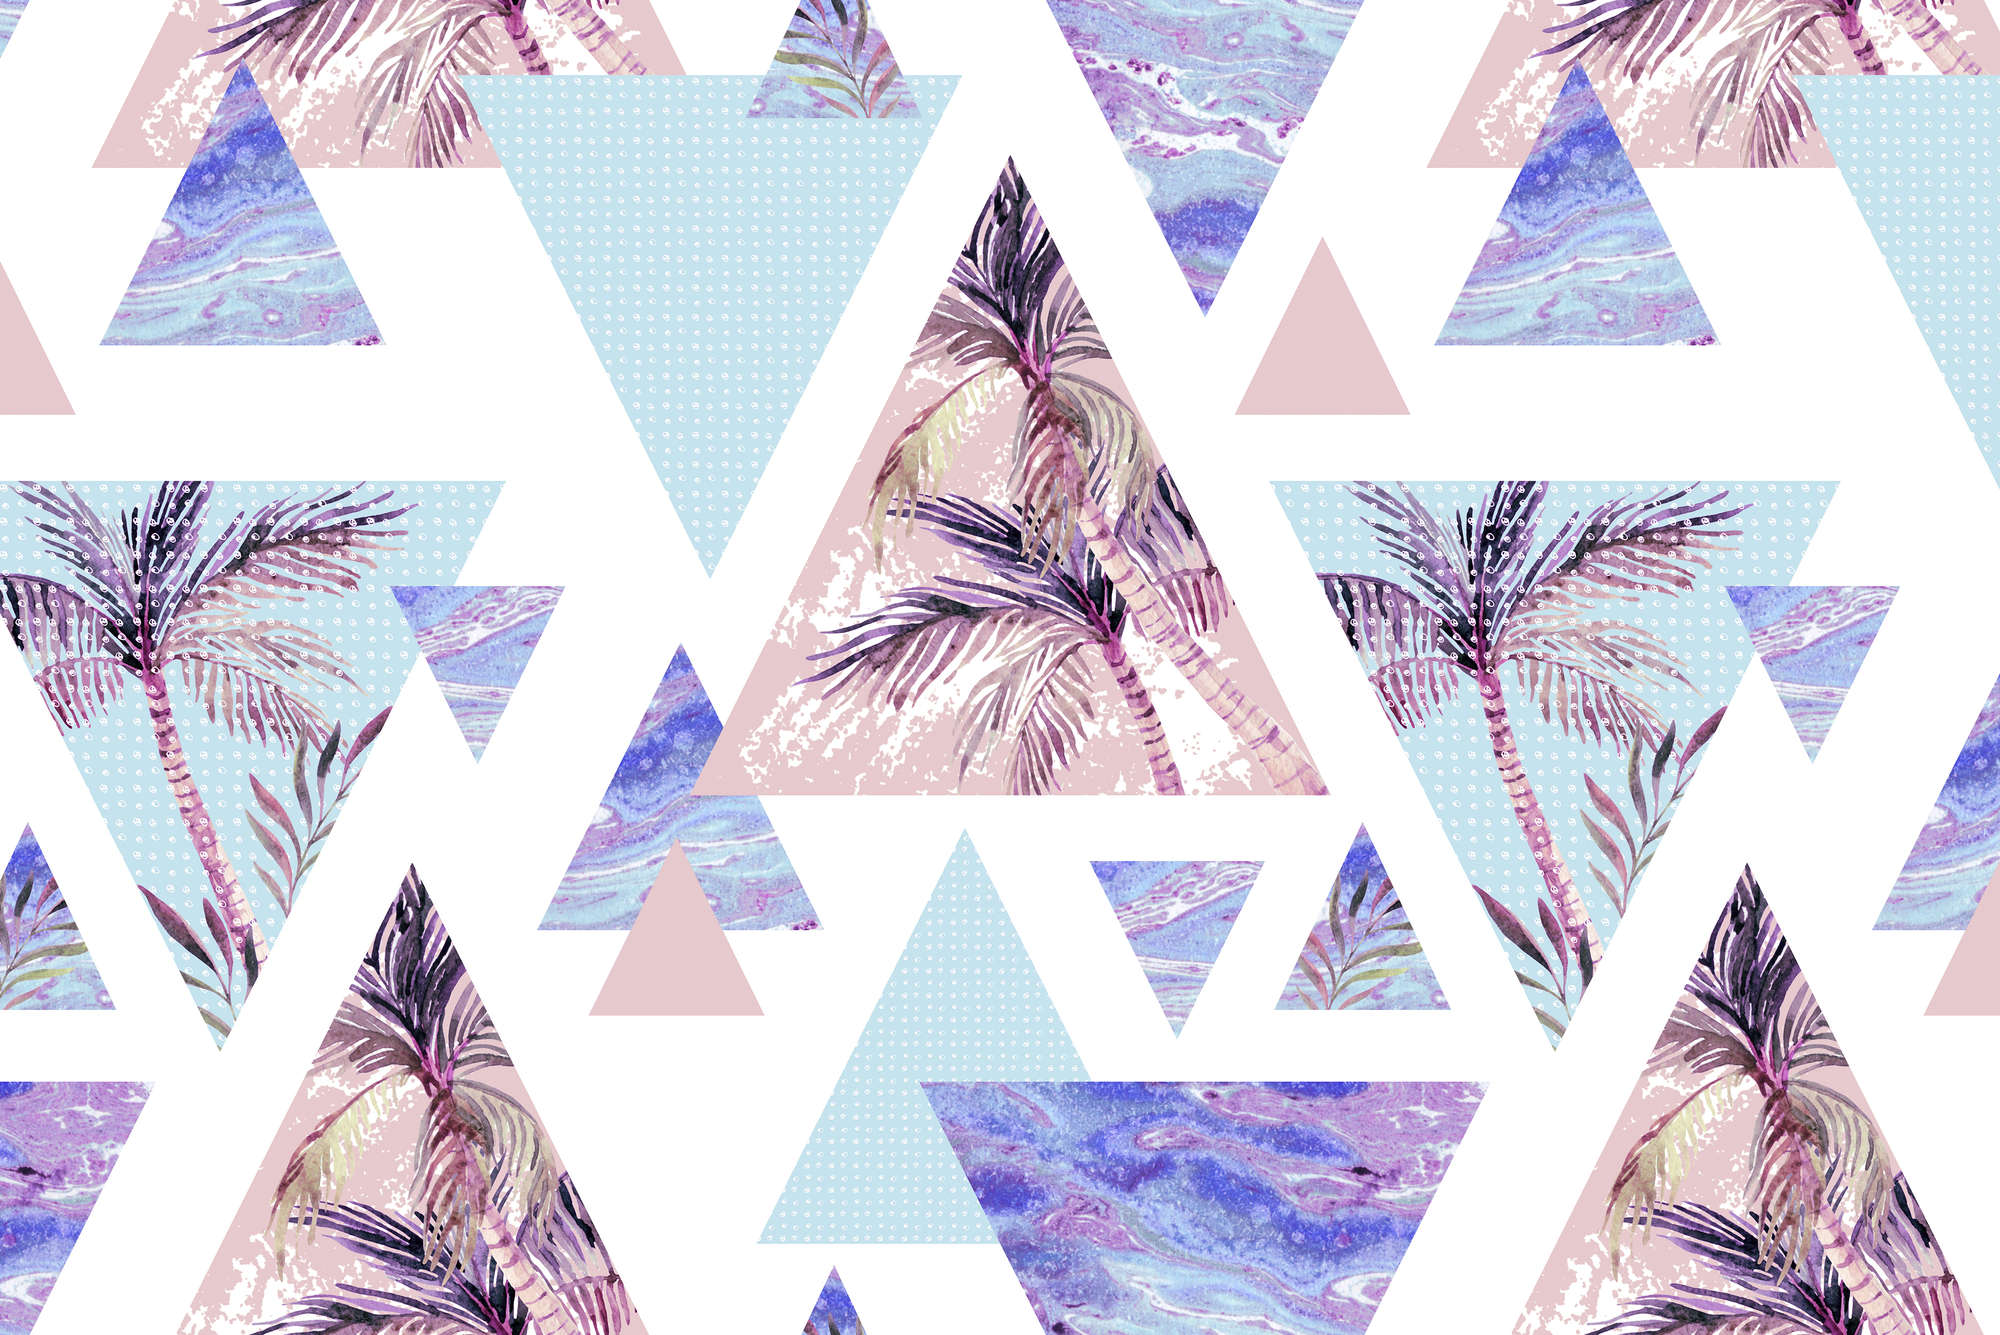             Graphic wall mural triangles with palm tree motifs on mother of pearl smooth fleece
        